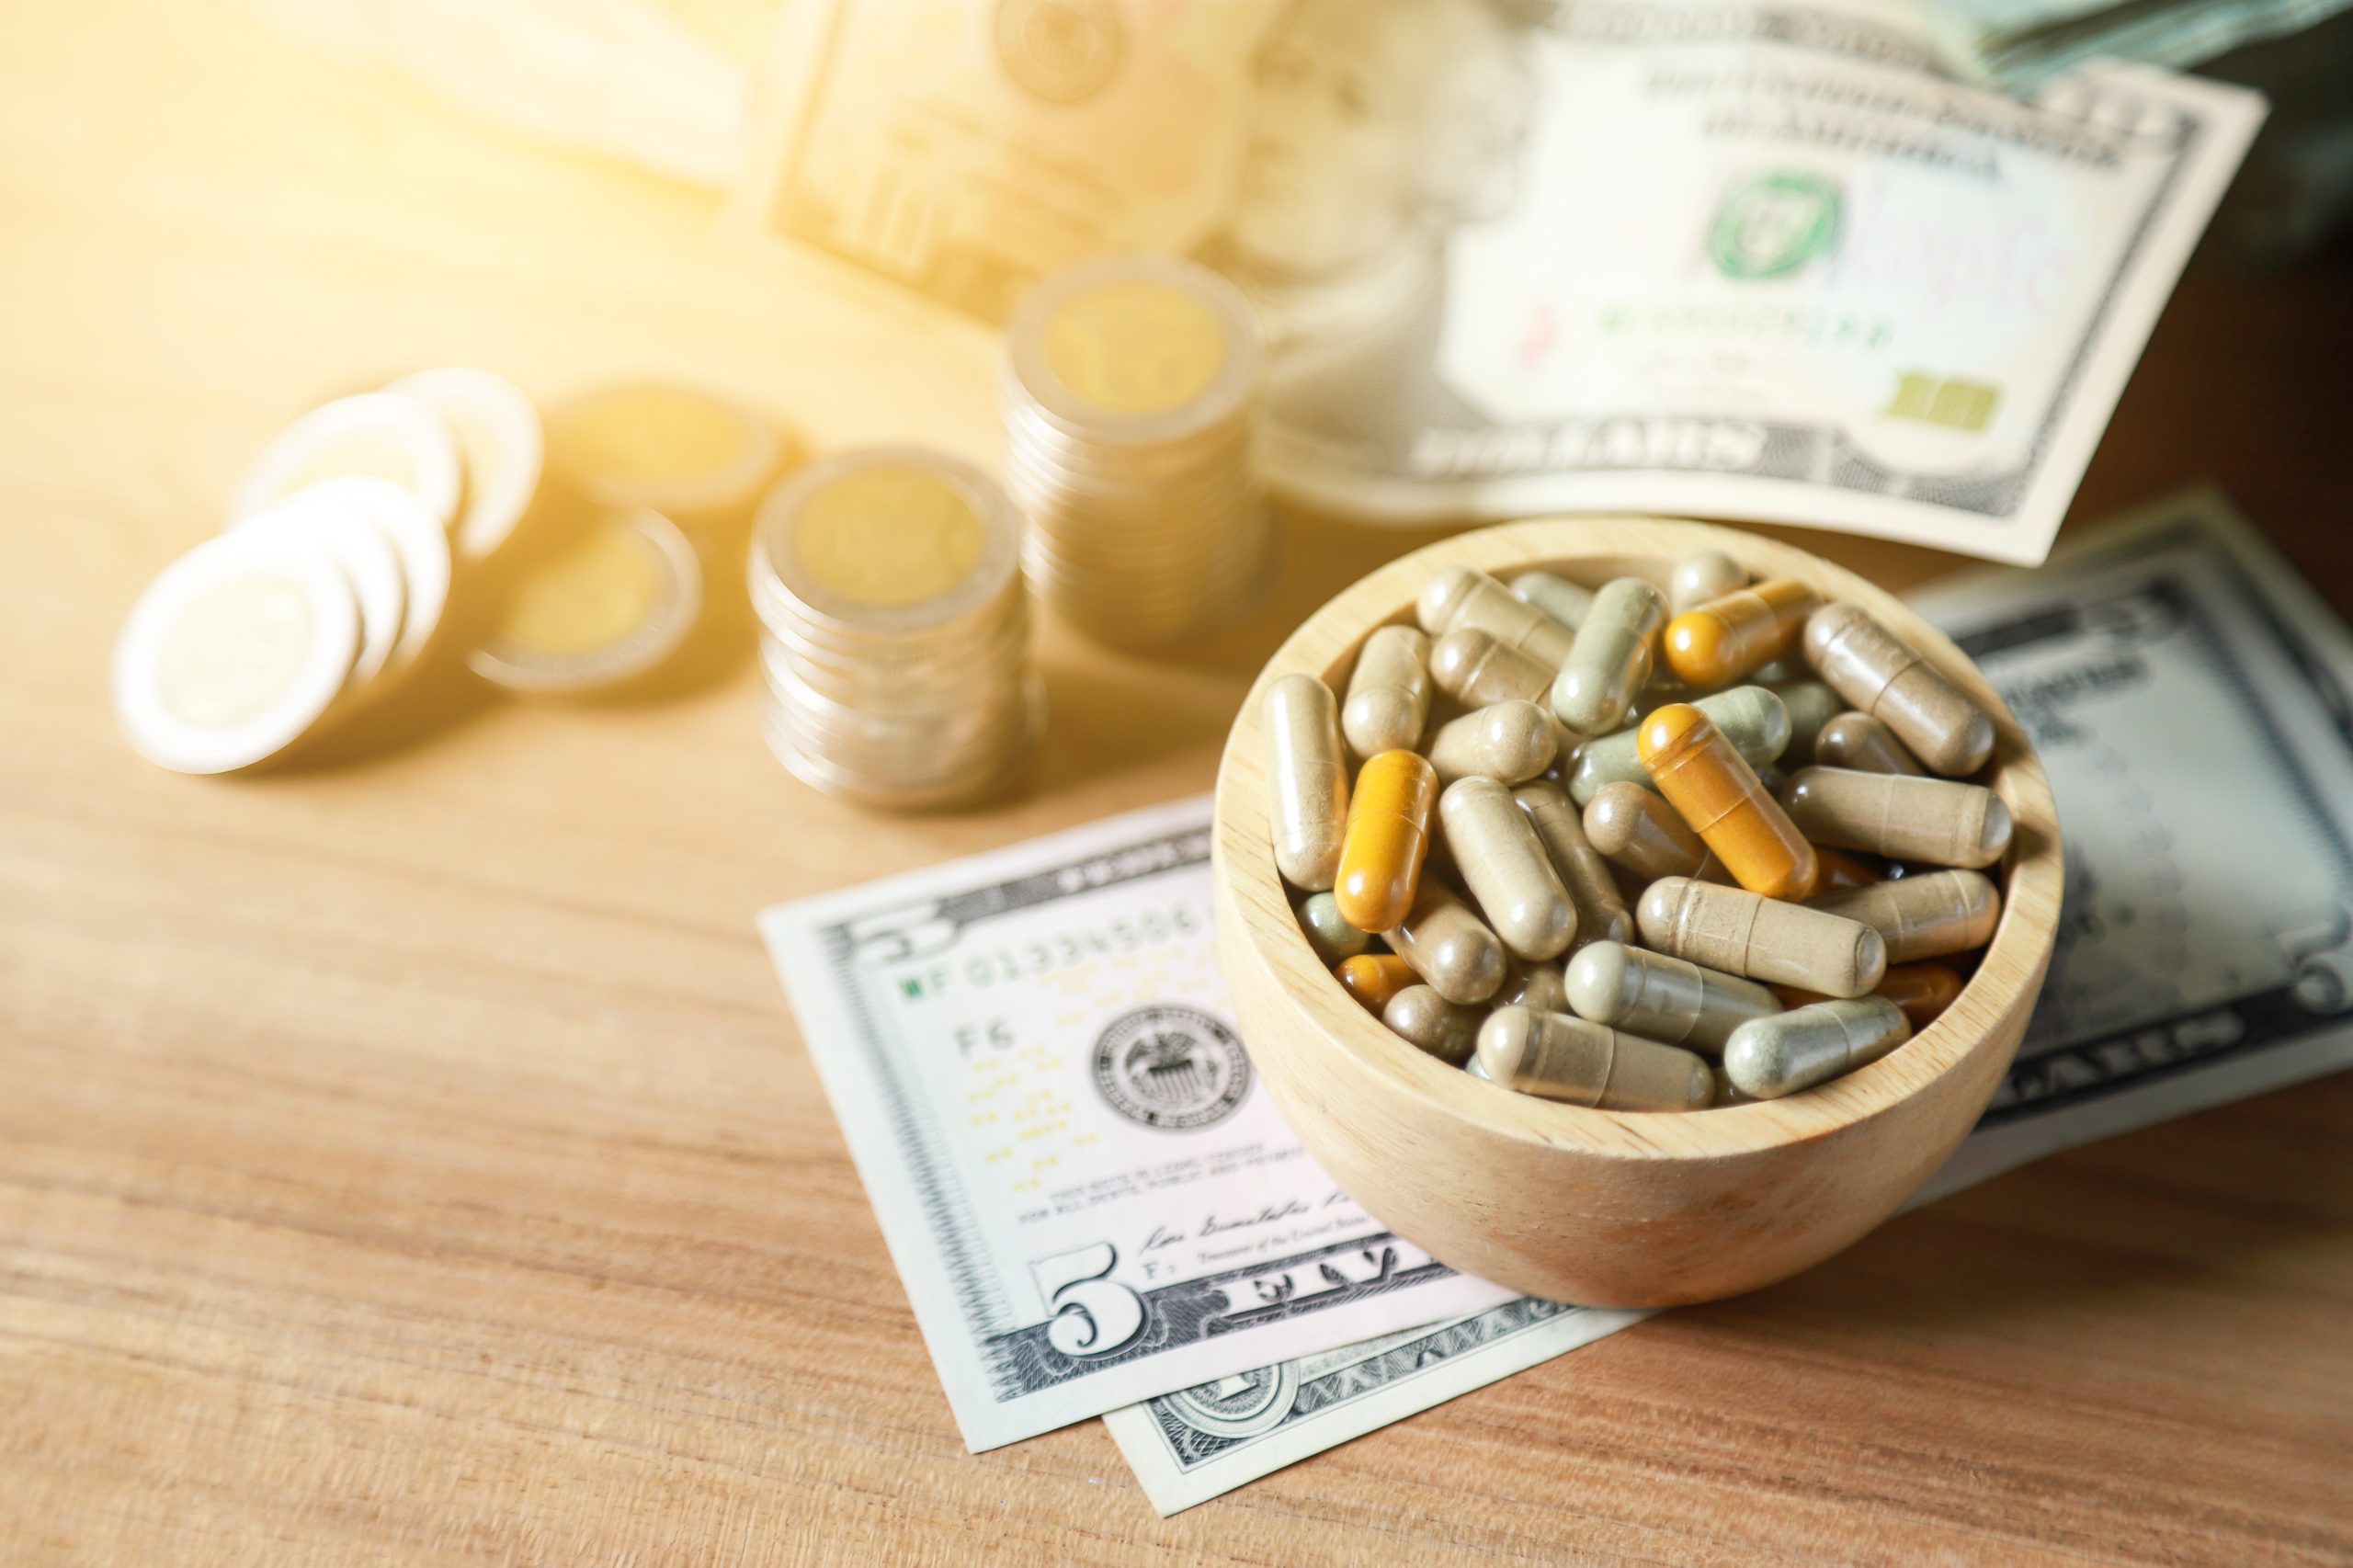 Supplement pills in a small bowl on a table next to coins and paper money